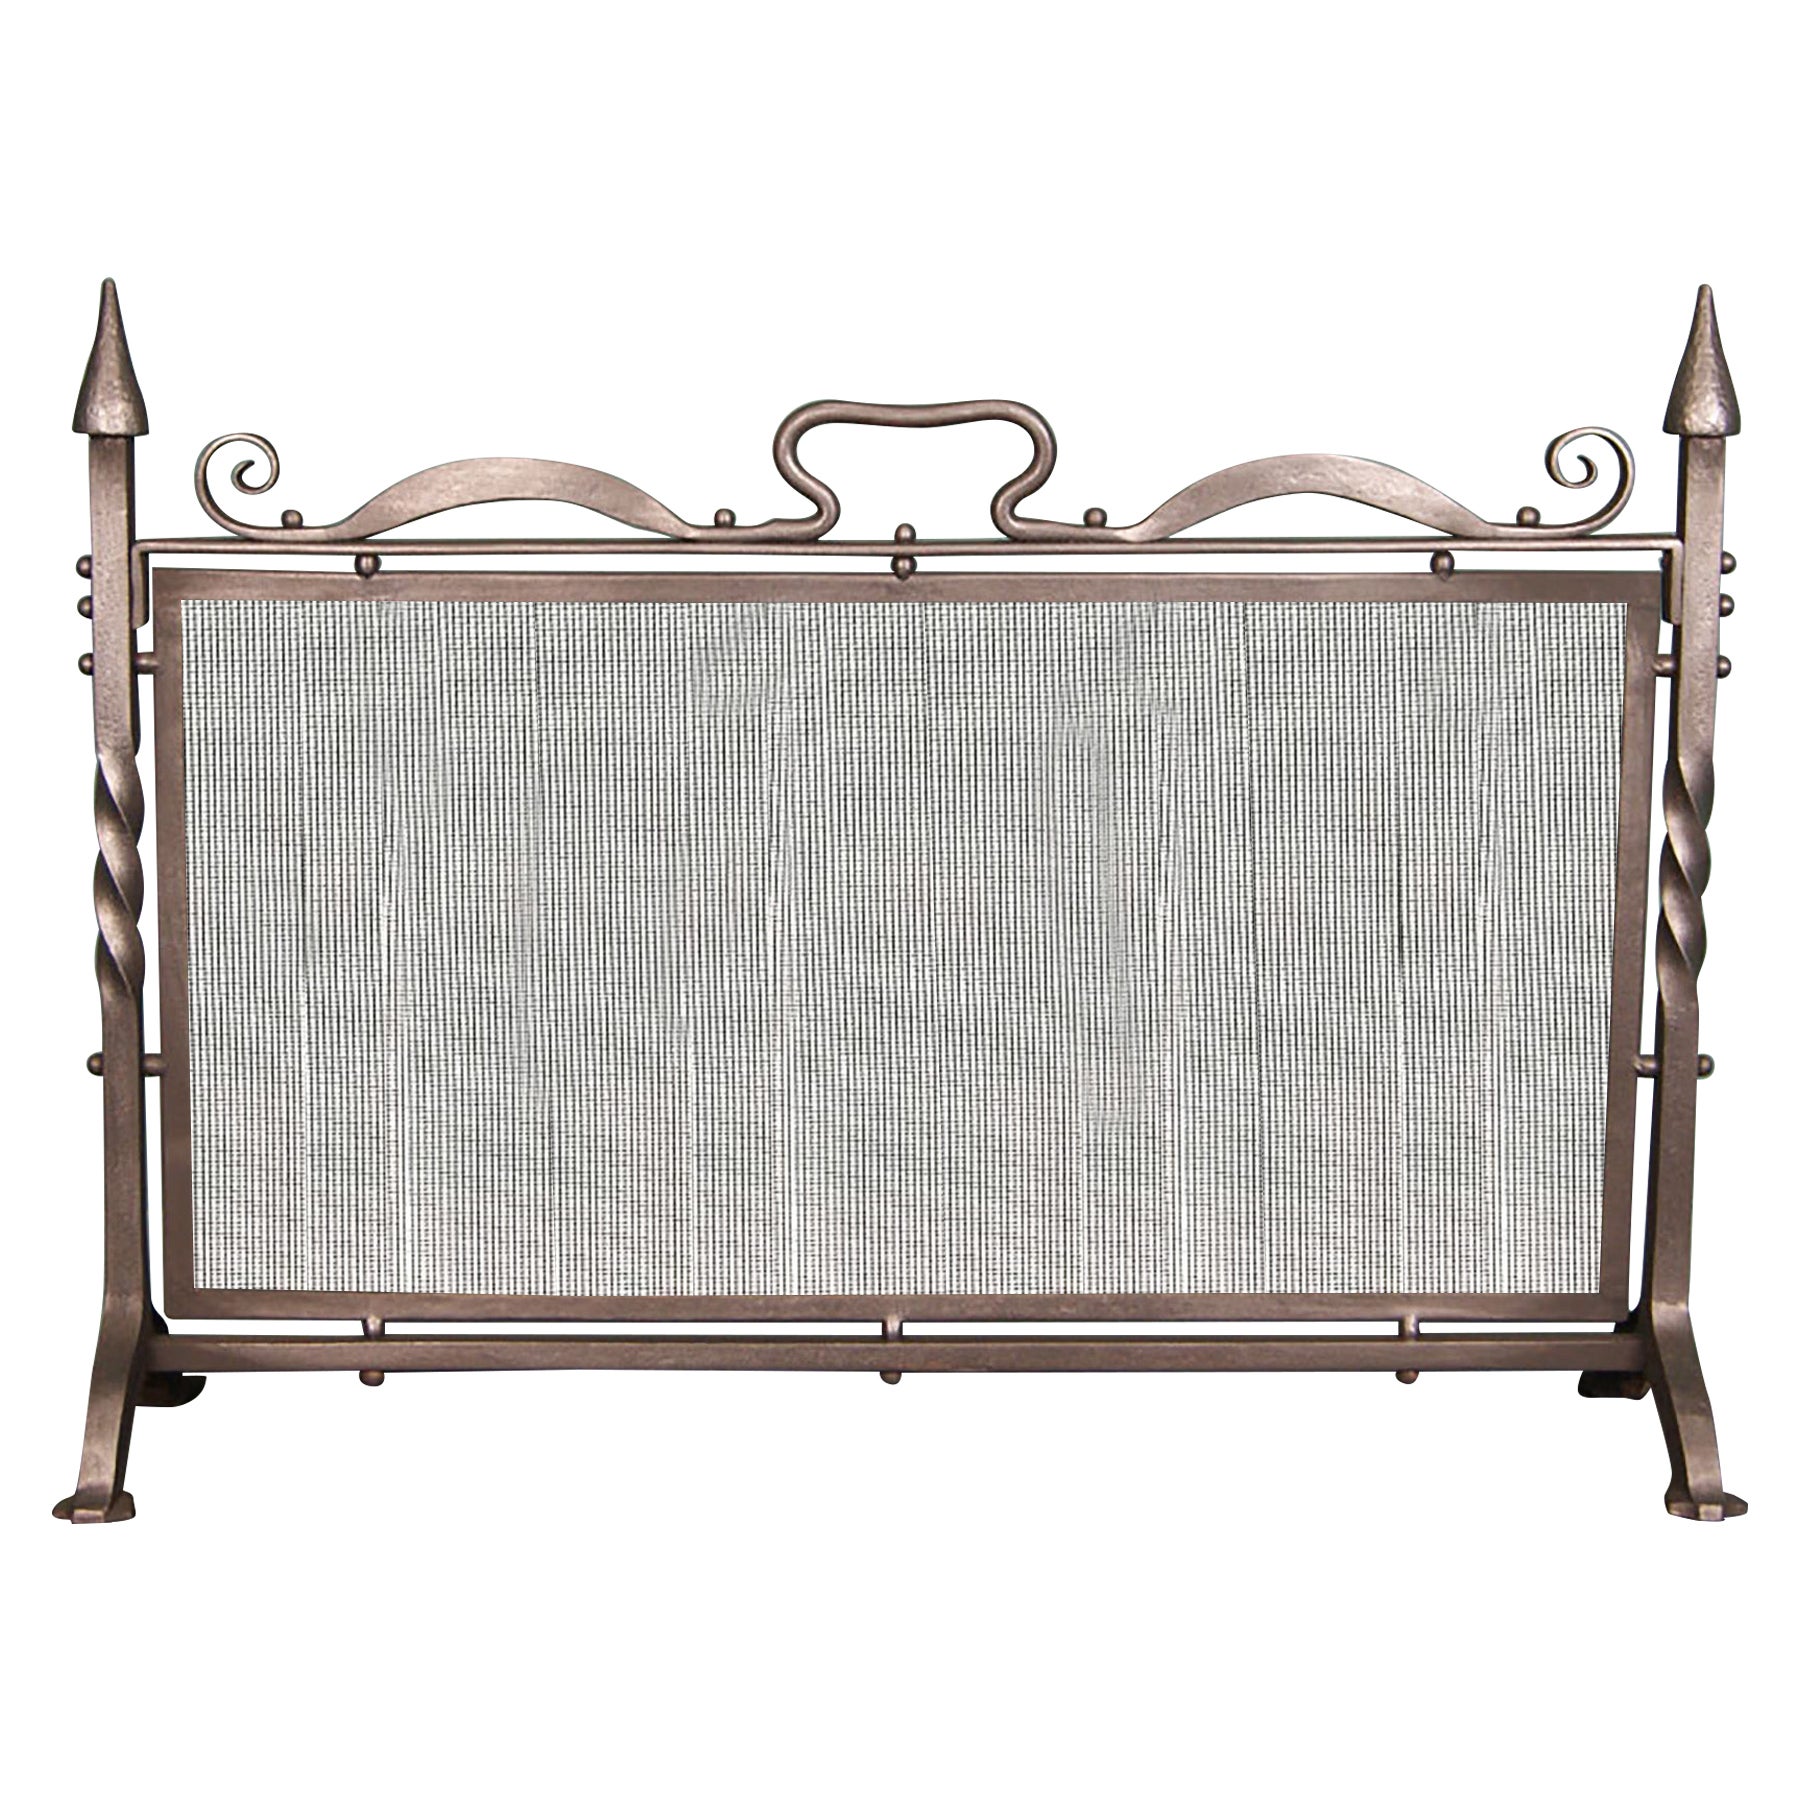 A Wrought-Iron Fire Screen For Sale